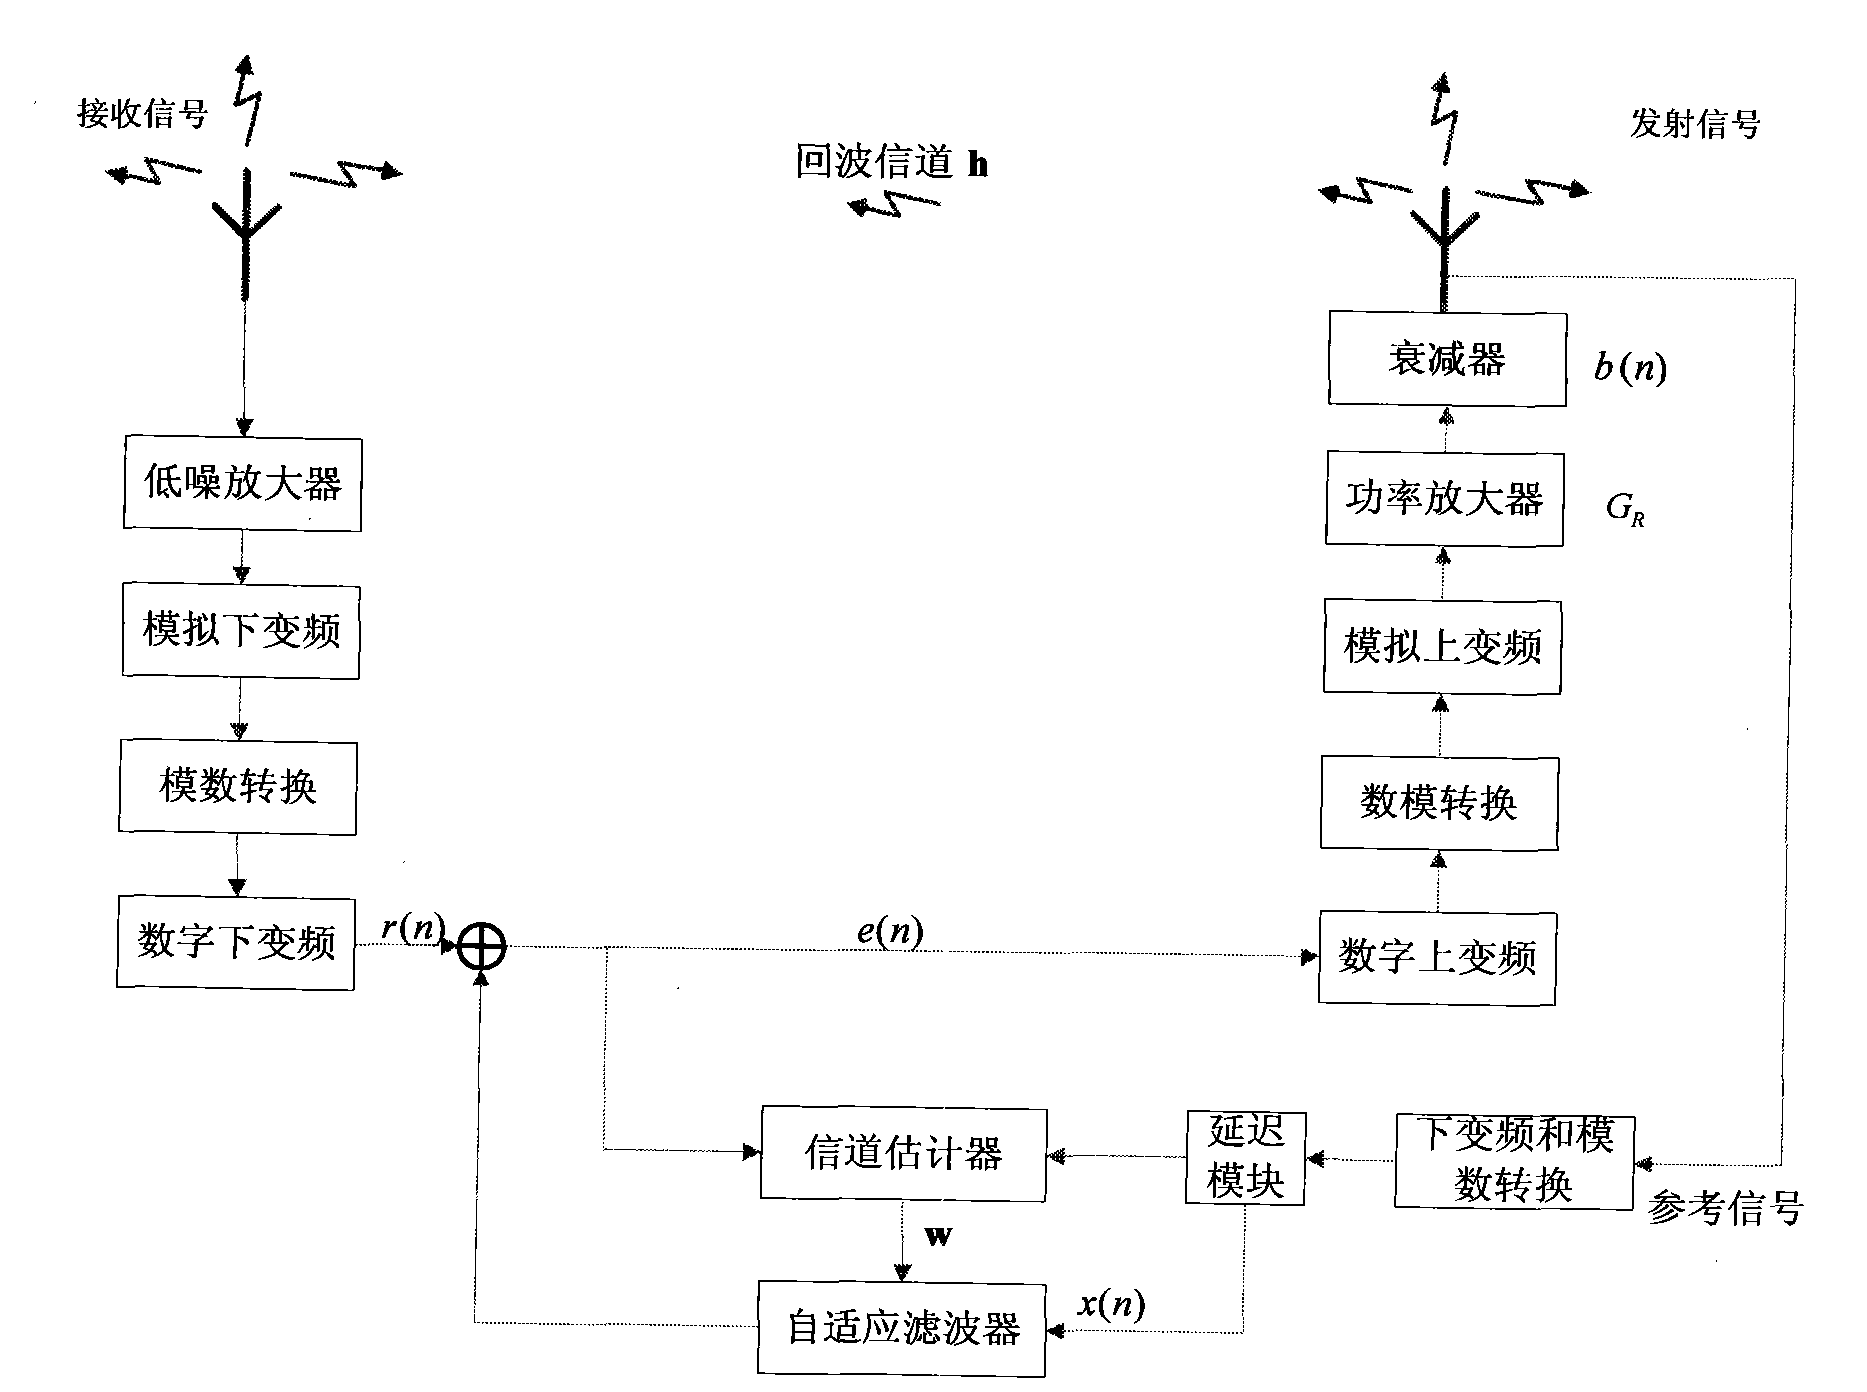 Power control based fast convergence adaptive method in internet connection sharing (ICS) repeater